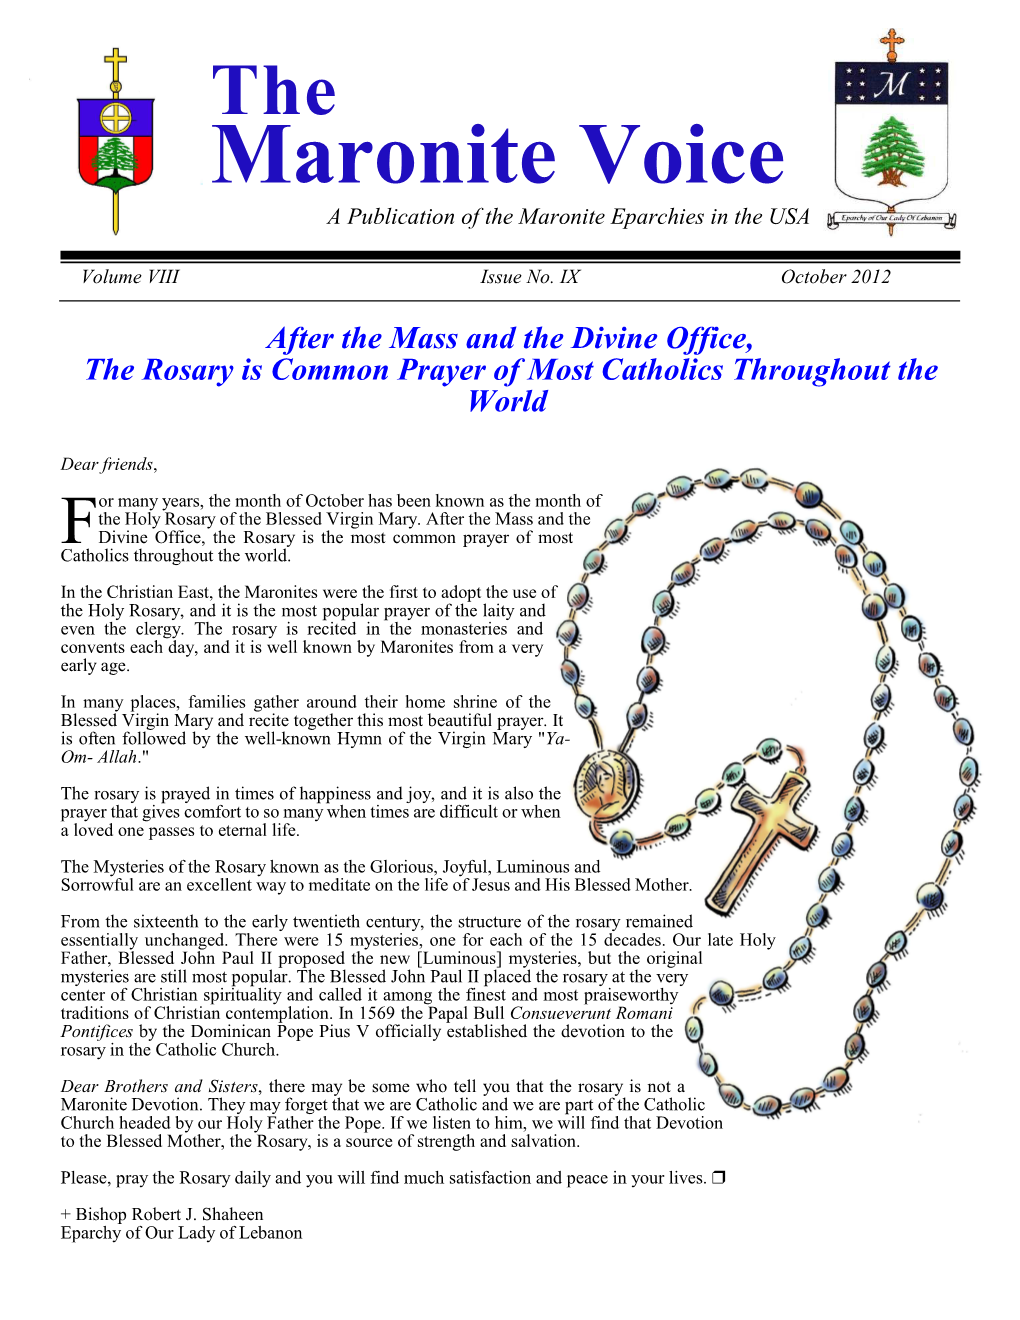 Publication of the Maronite Eparchies in the USA